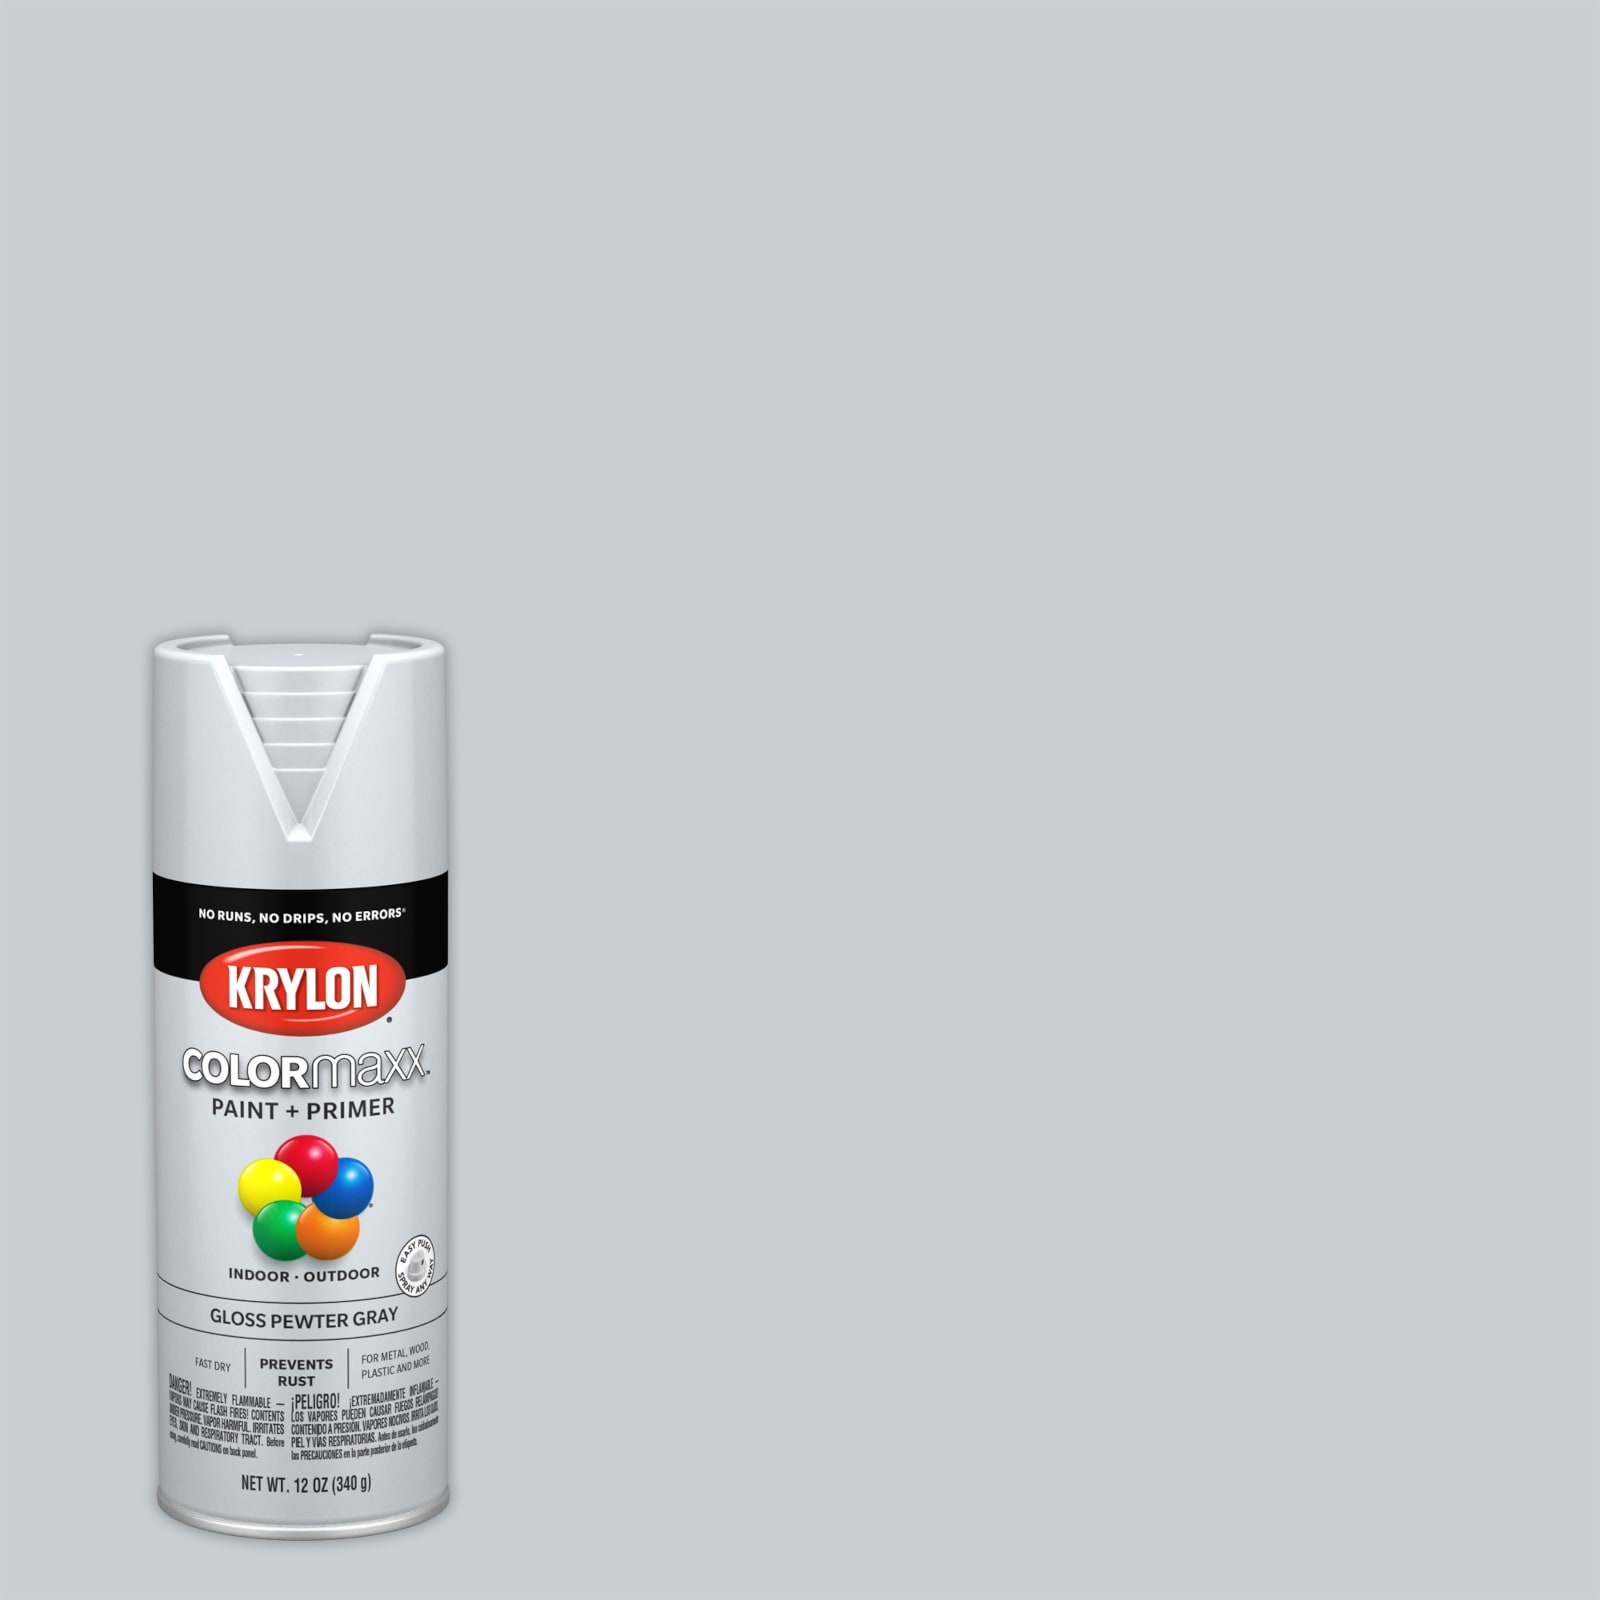 Krylon COLORmaxx Satin White Spray Paint and Primer In One (NET WT. 12-oz)  in the Spray Paint department at